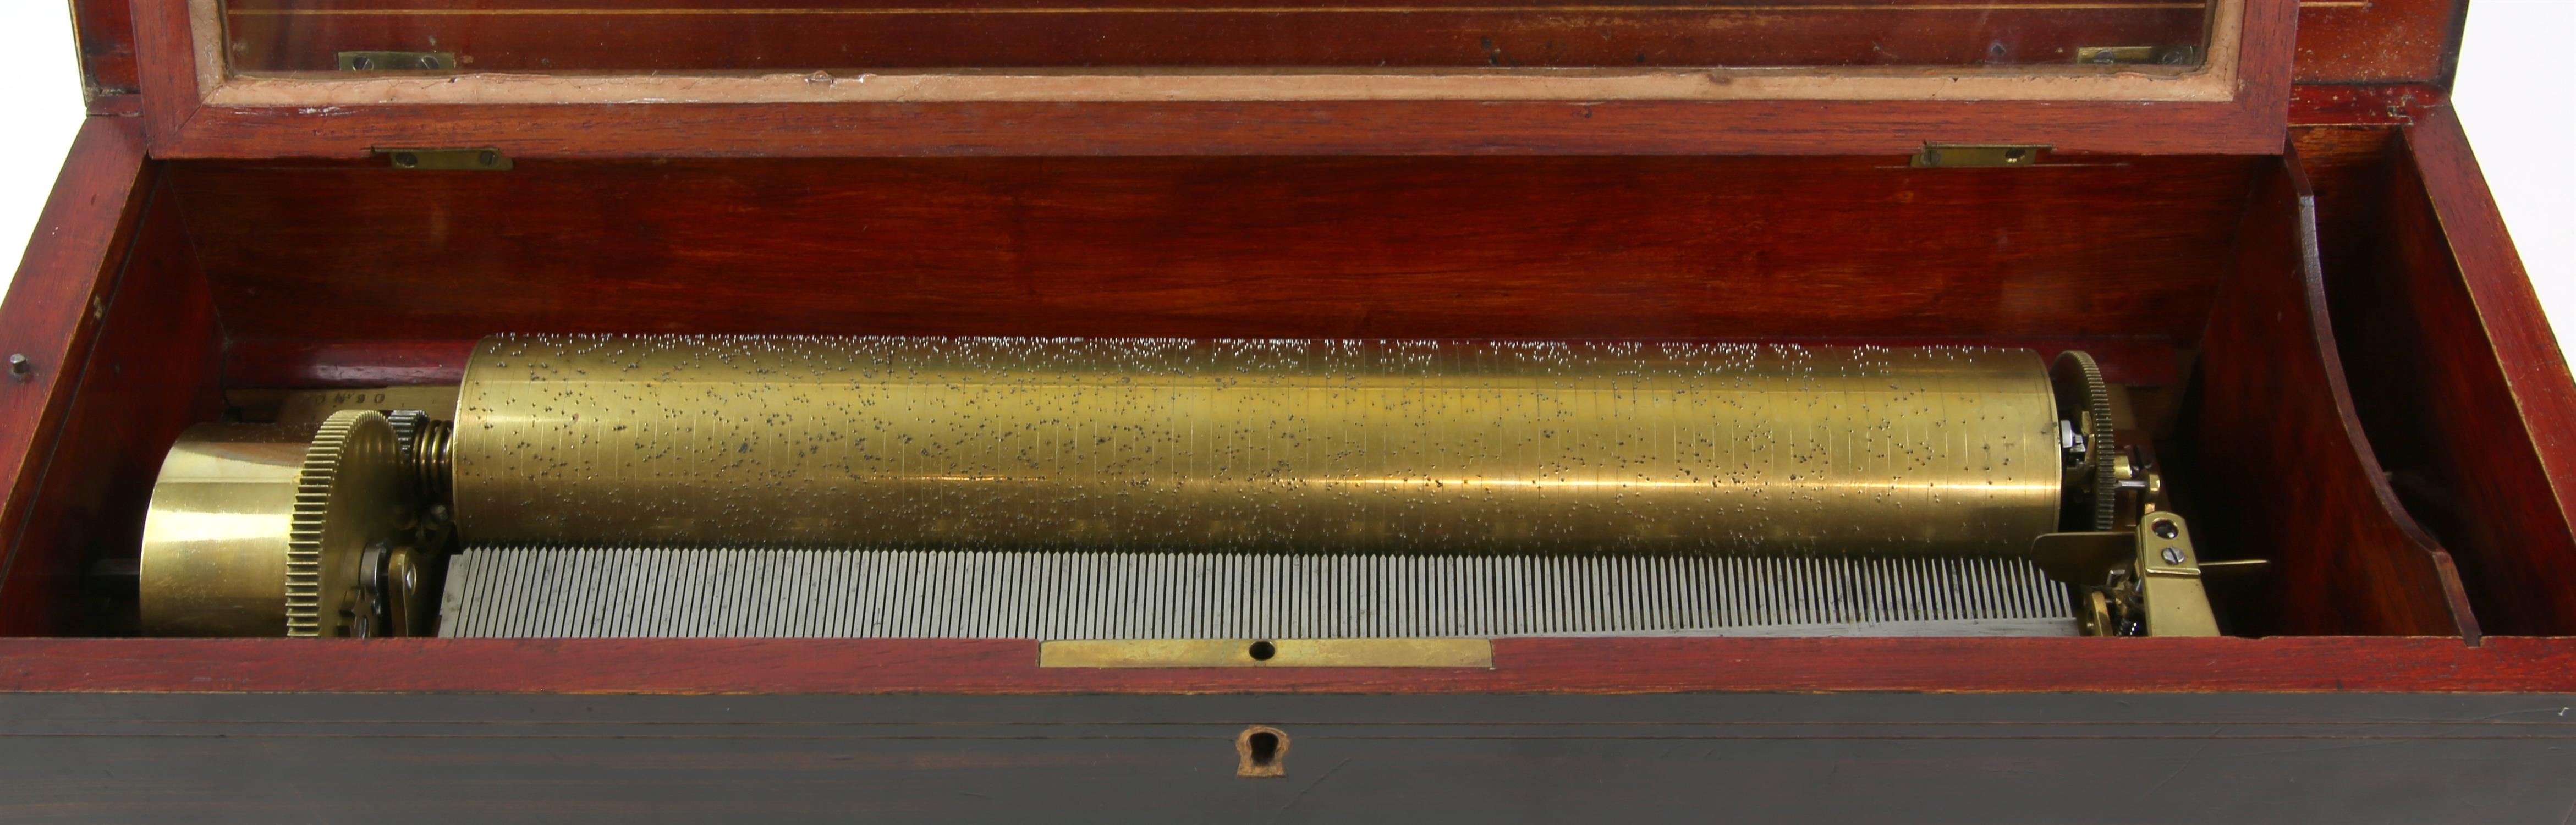 19th century Swiss rosewood and marquetry inlaid cylinder music box, label to underside of cover - Image 2 of 3